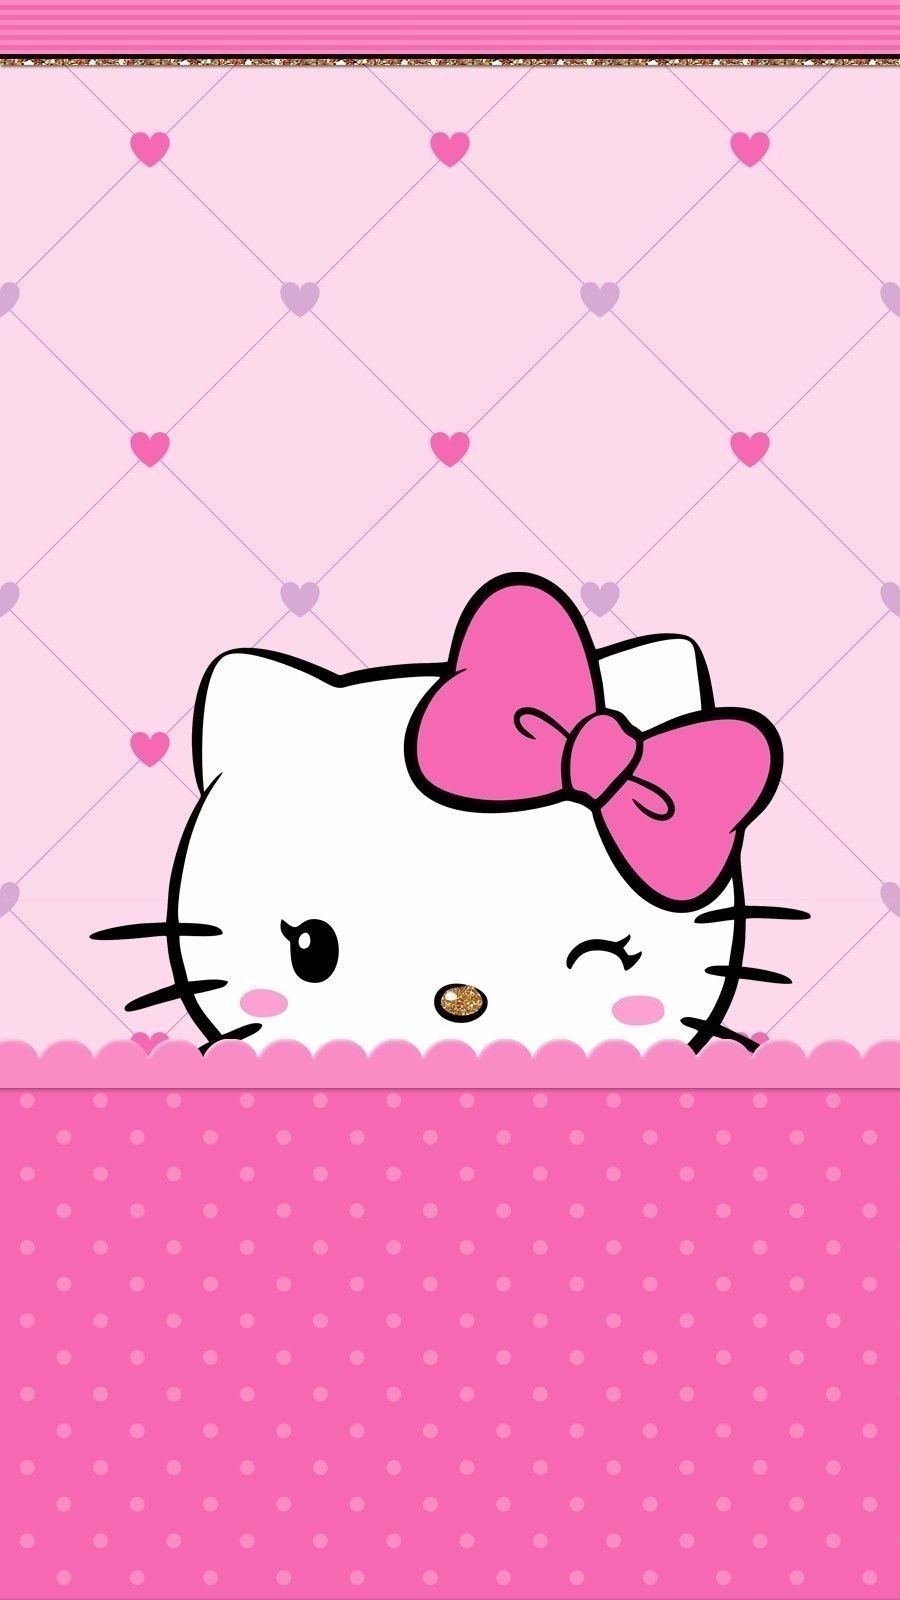 Wallpapers Hello Kitty Love - Wallpaper Cave